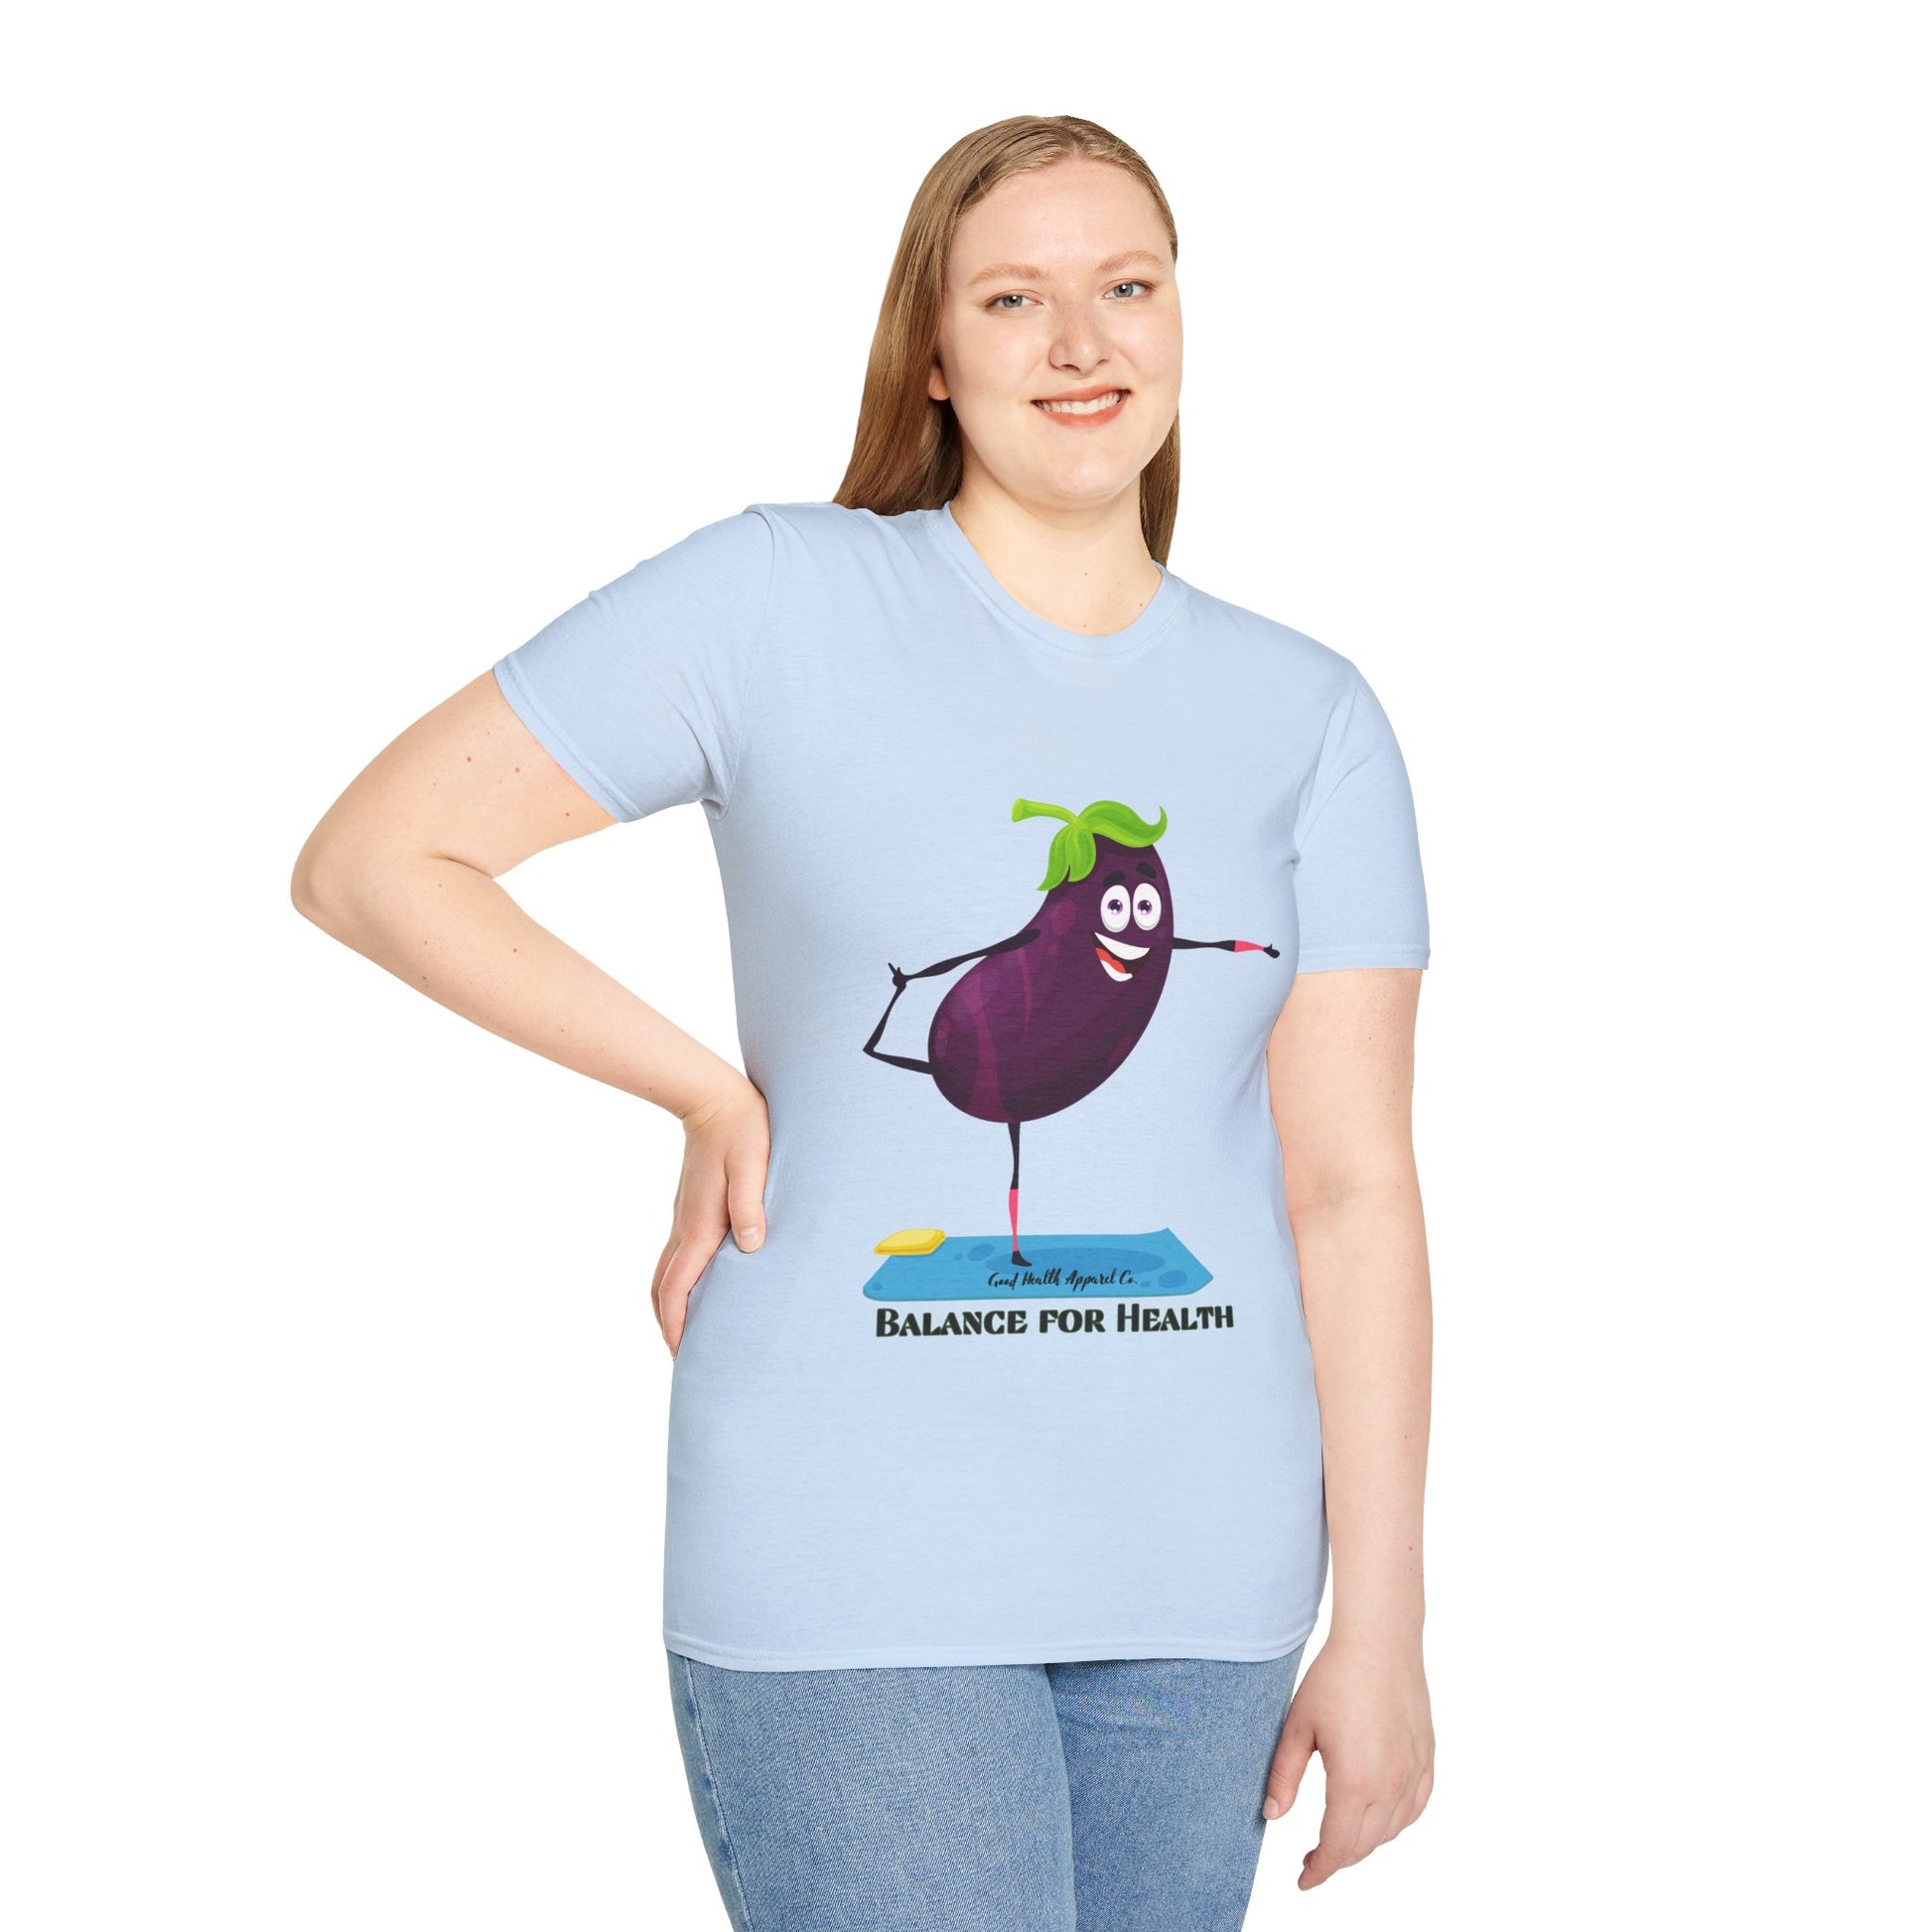 A woman smiles, wearing a unisex t-shirt with a cartoon eggplant design. The tee, made of soft 100% cotton, features twill tape shoulders and ribbed collar for durability and comfort.